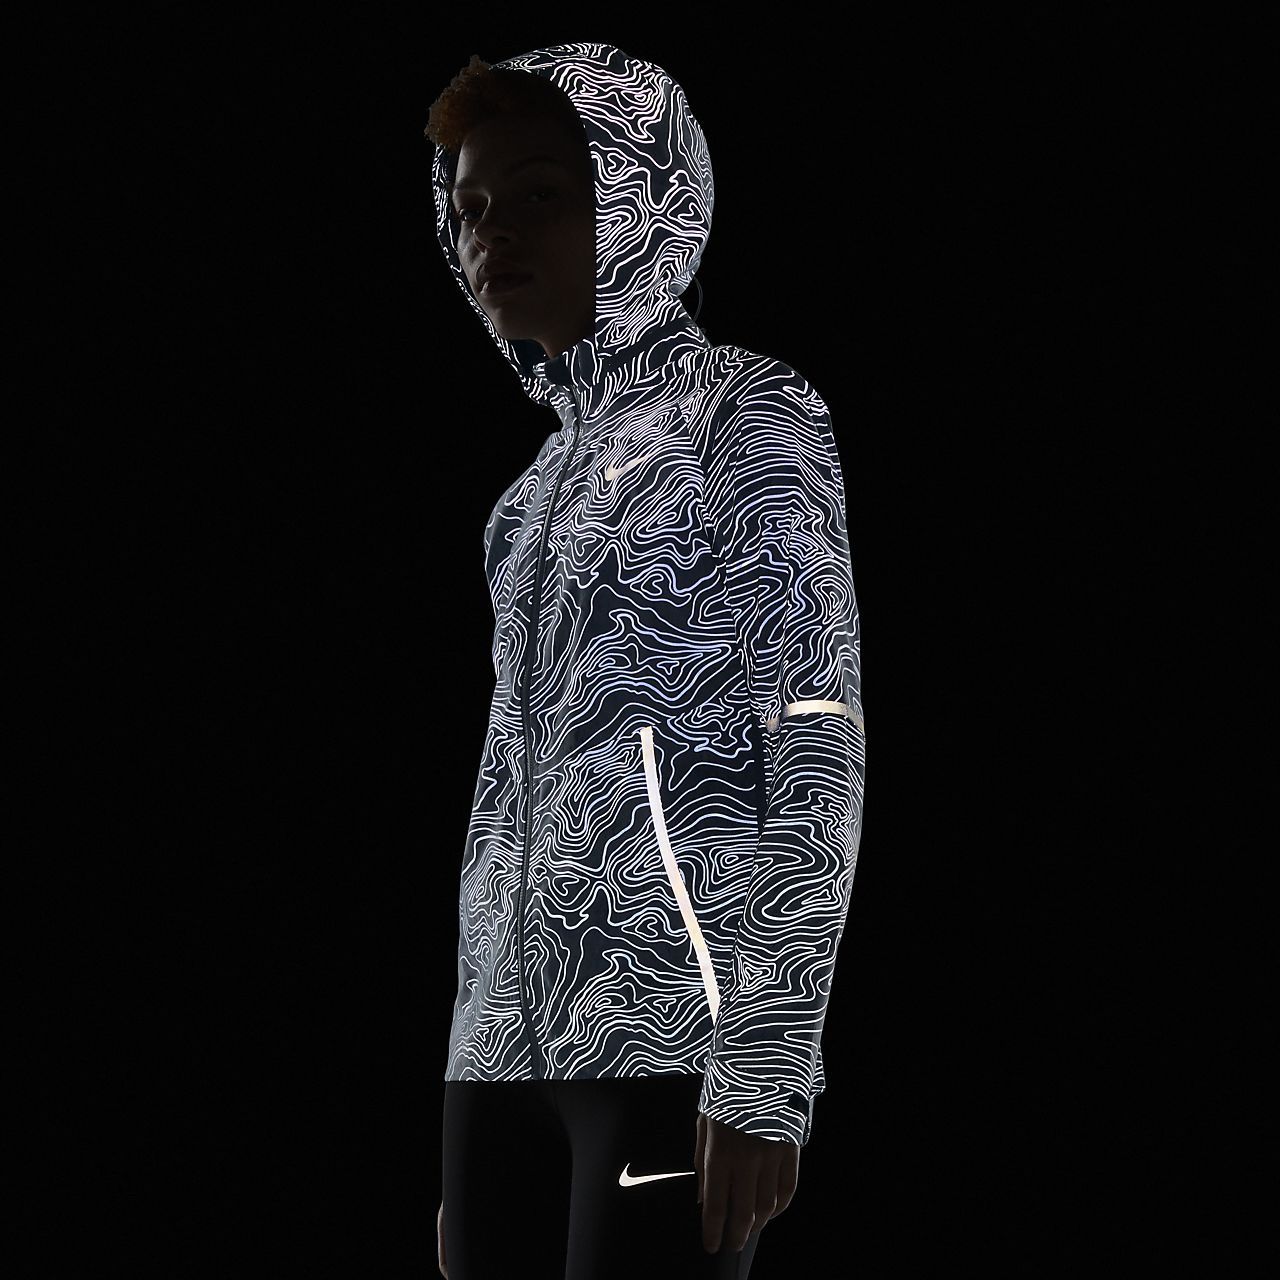 reflective print running jacket men's size small NWT for Sale in Portland, OR OfferUp